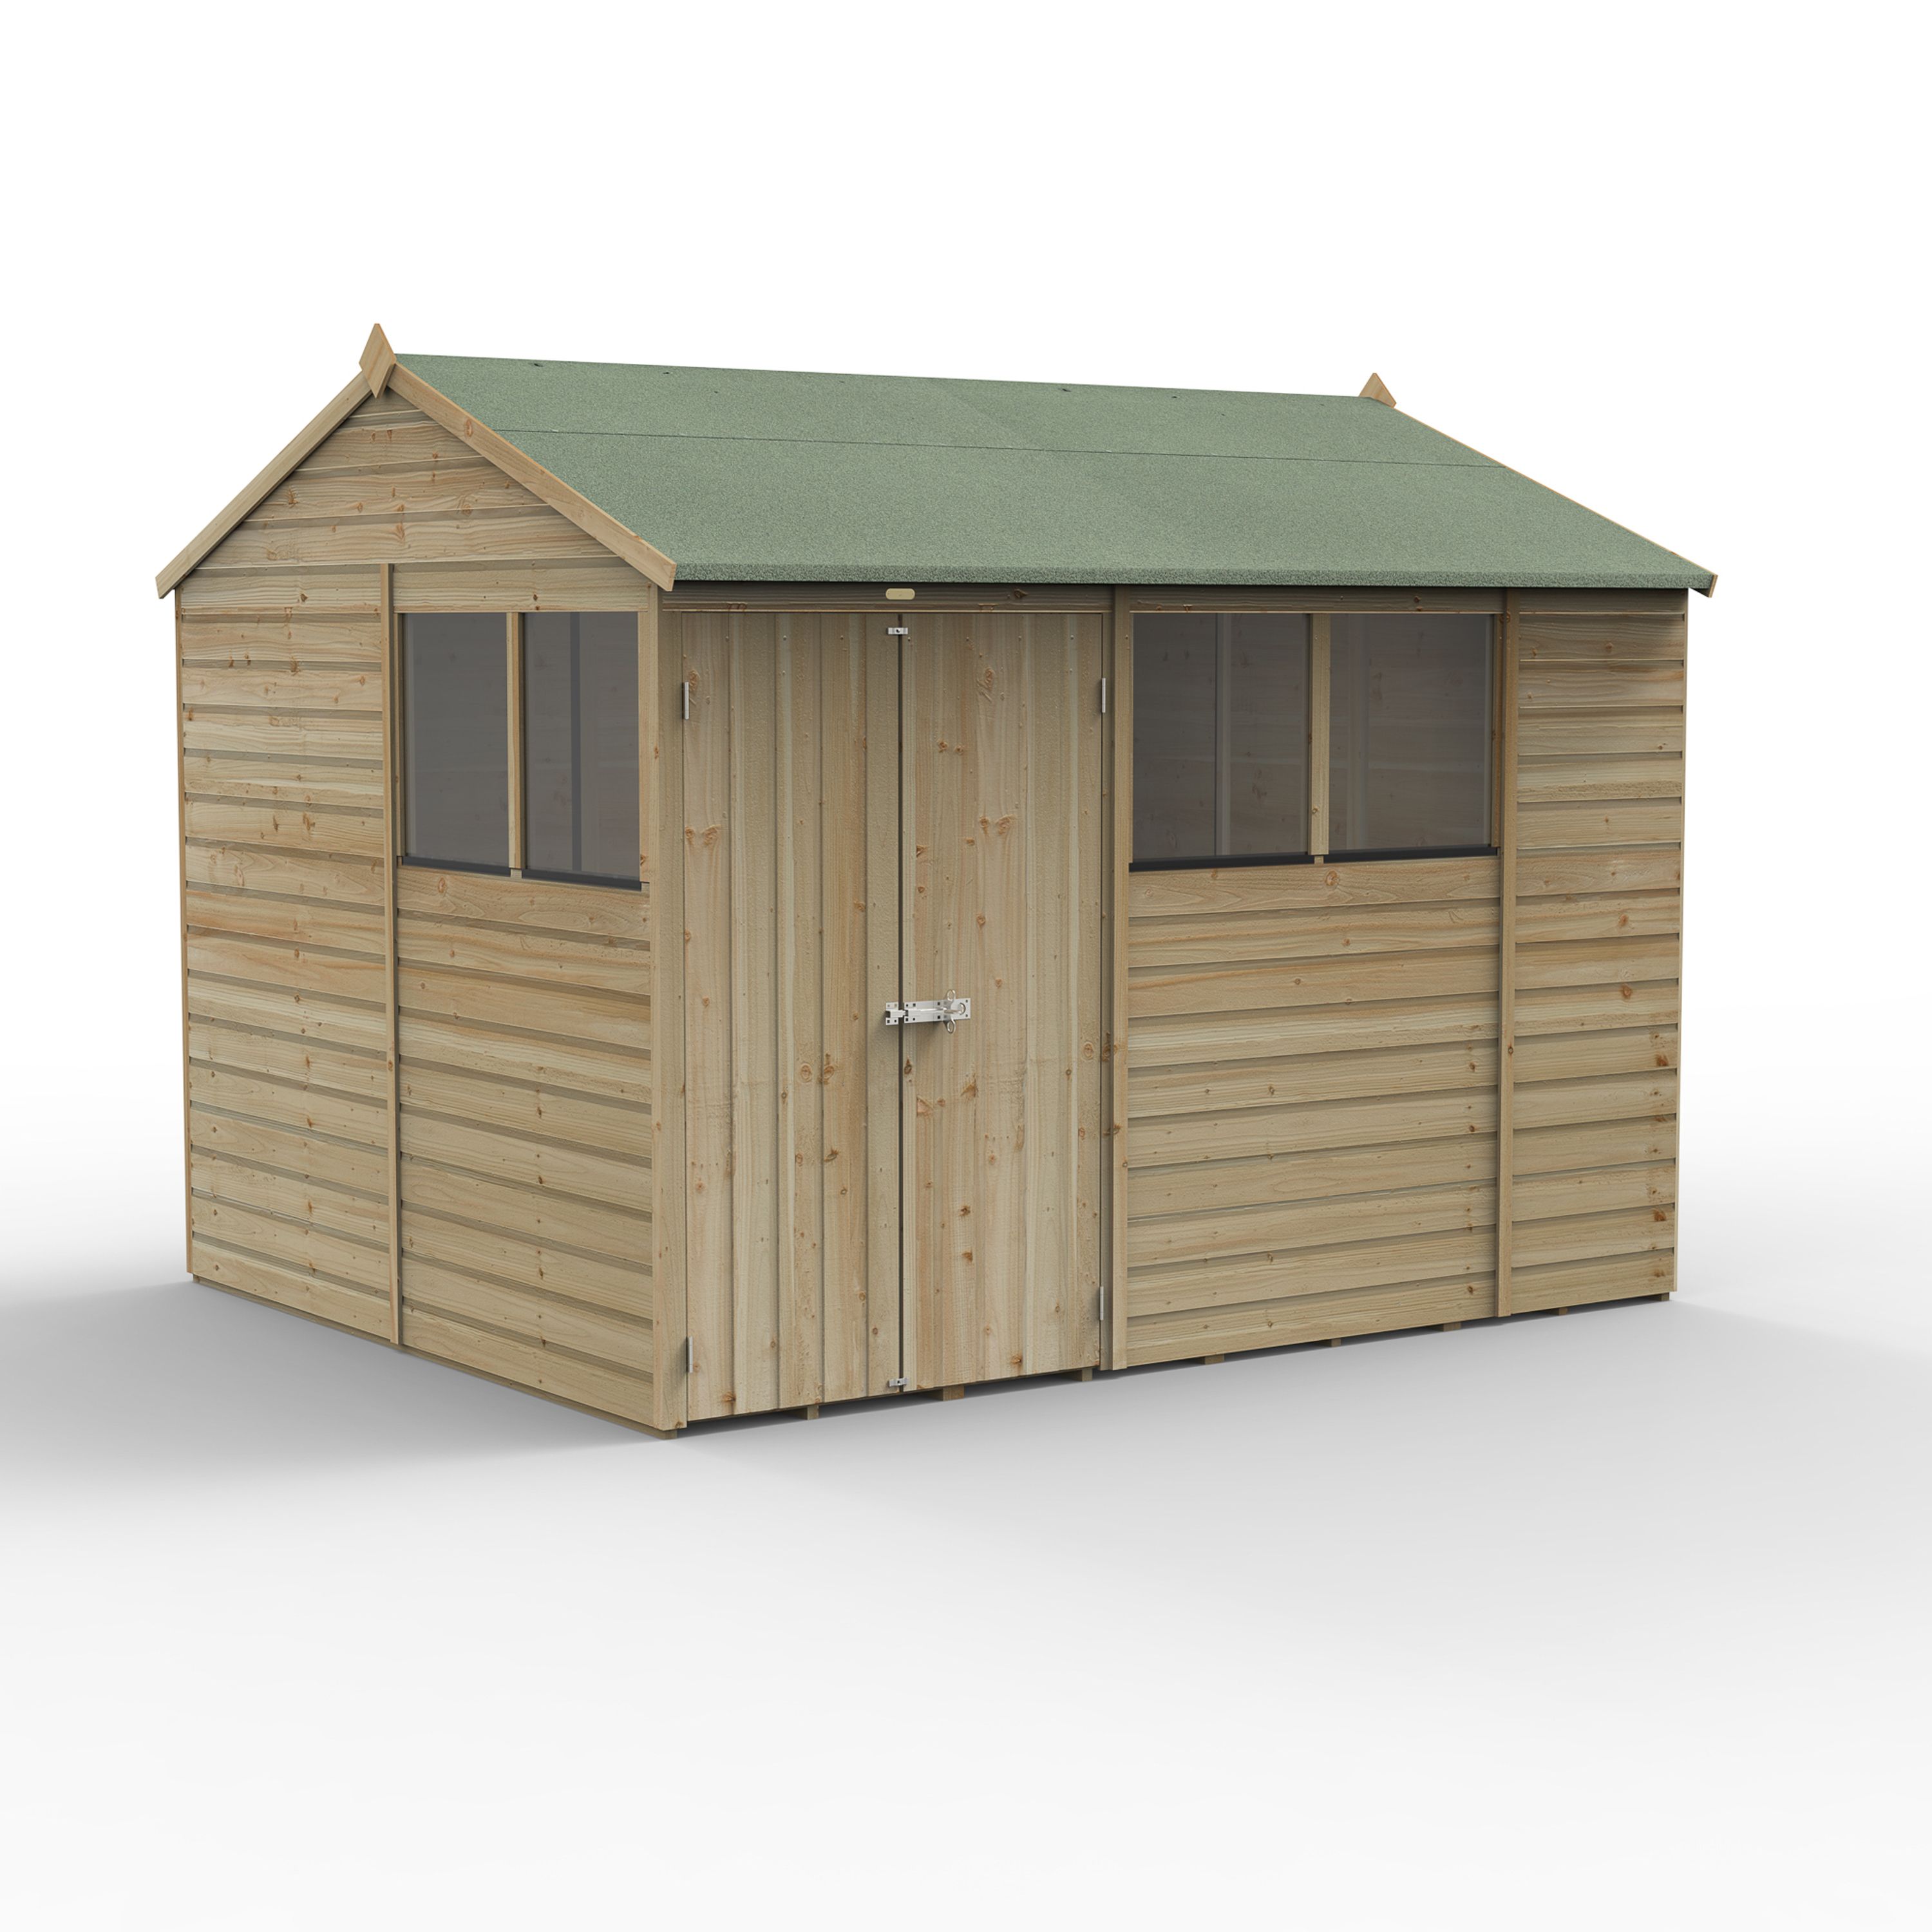 Forest Garden Beckwood 10x8 ft Reverse apex Natural timber Wooden 2 door Shed with floor & 4 windows (Base included)